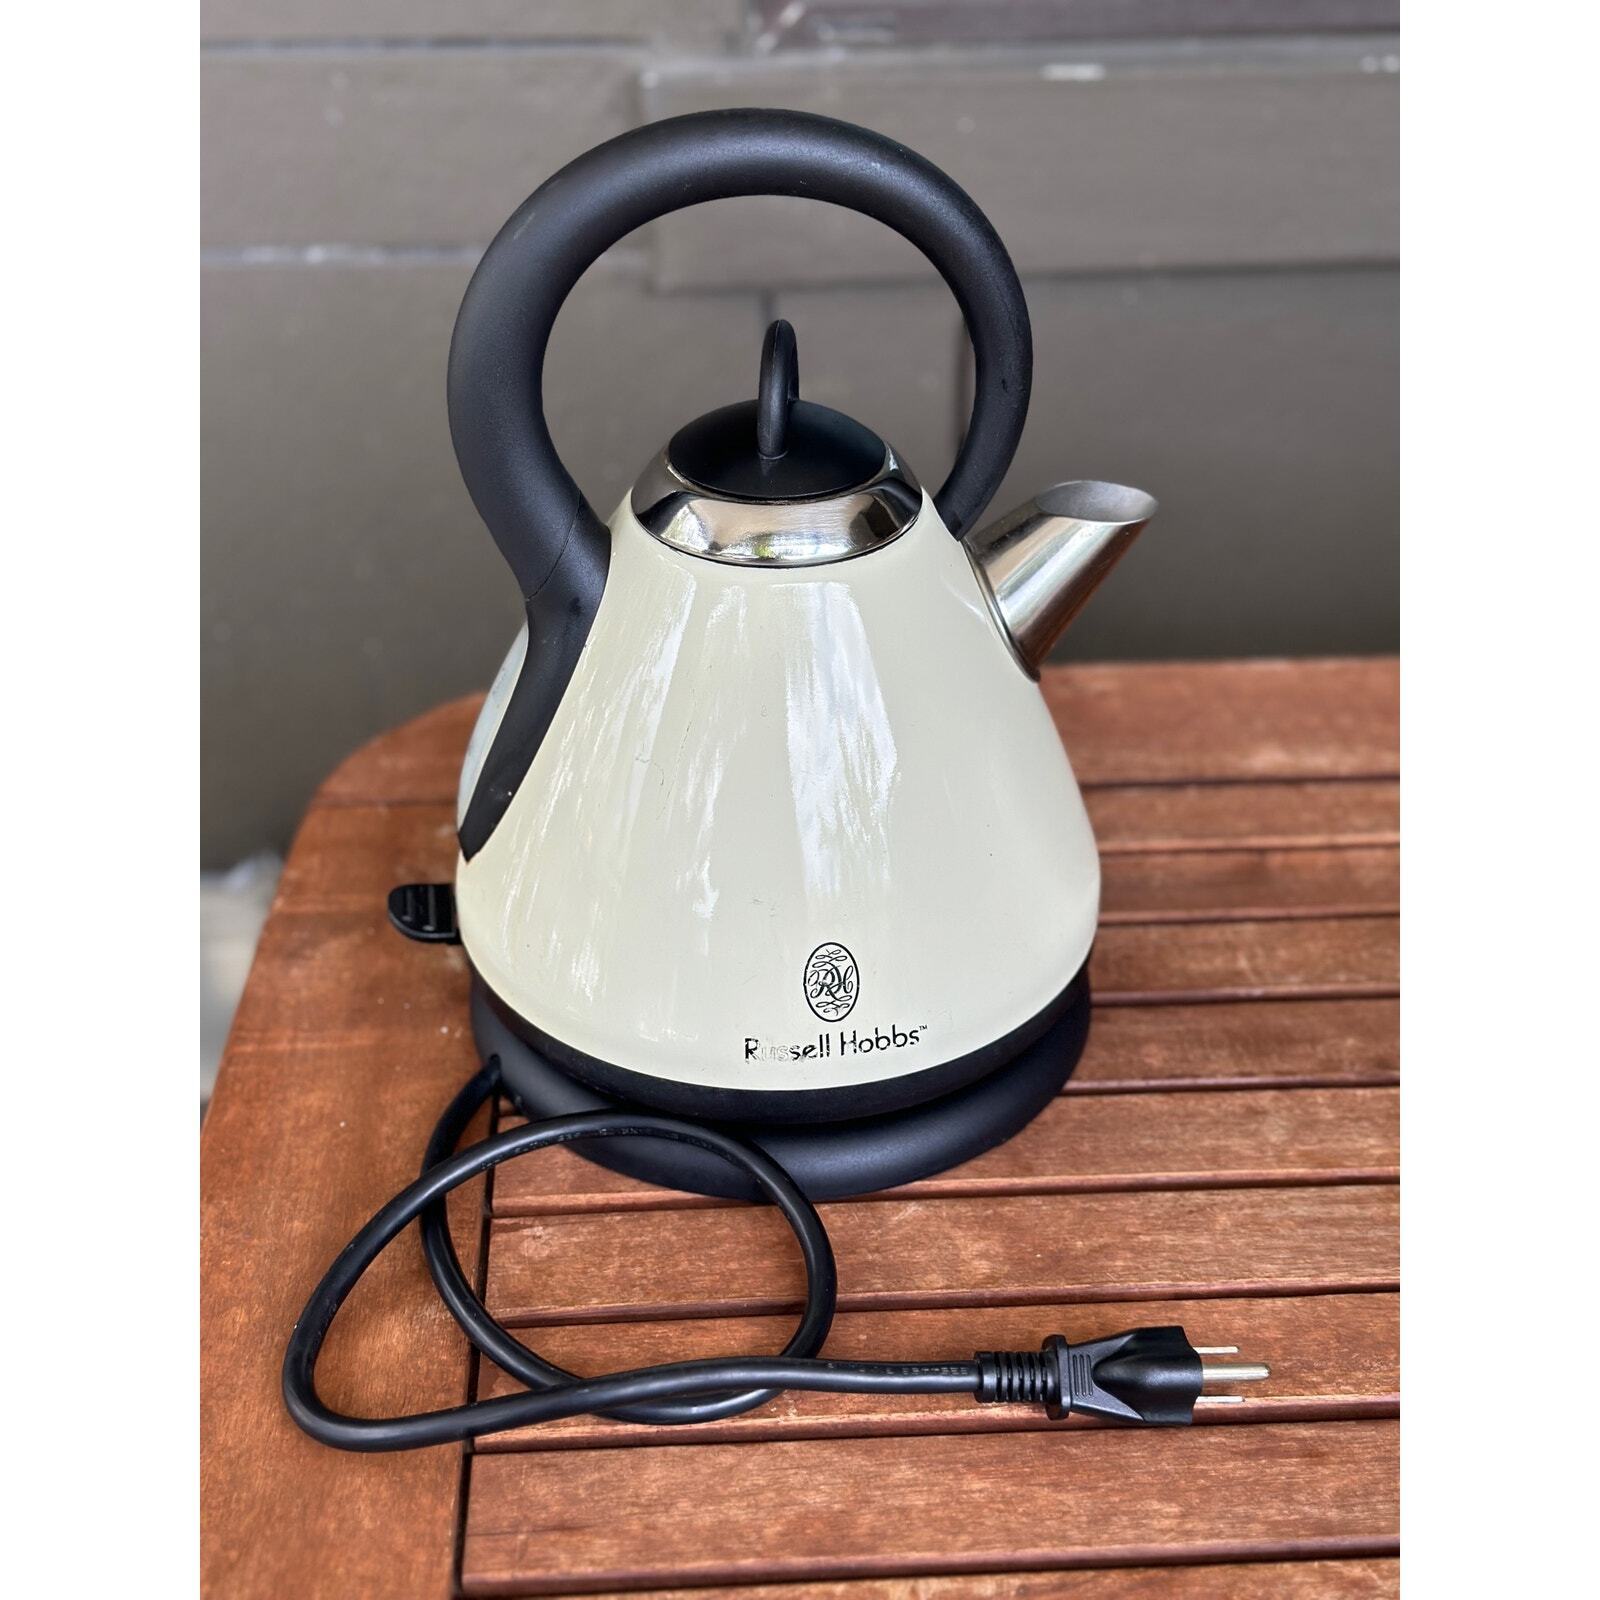 Russell Hobbs 1.8L Stainless Steel Electric Cordless Kettle